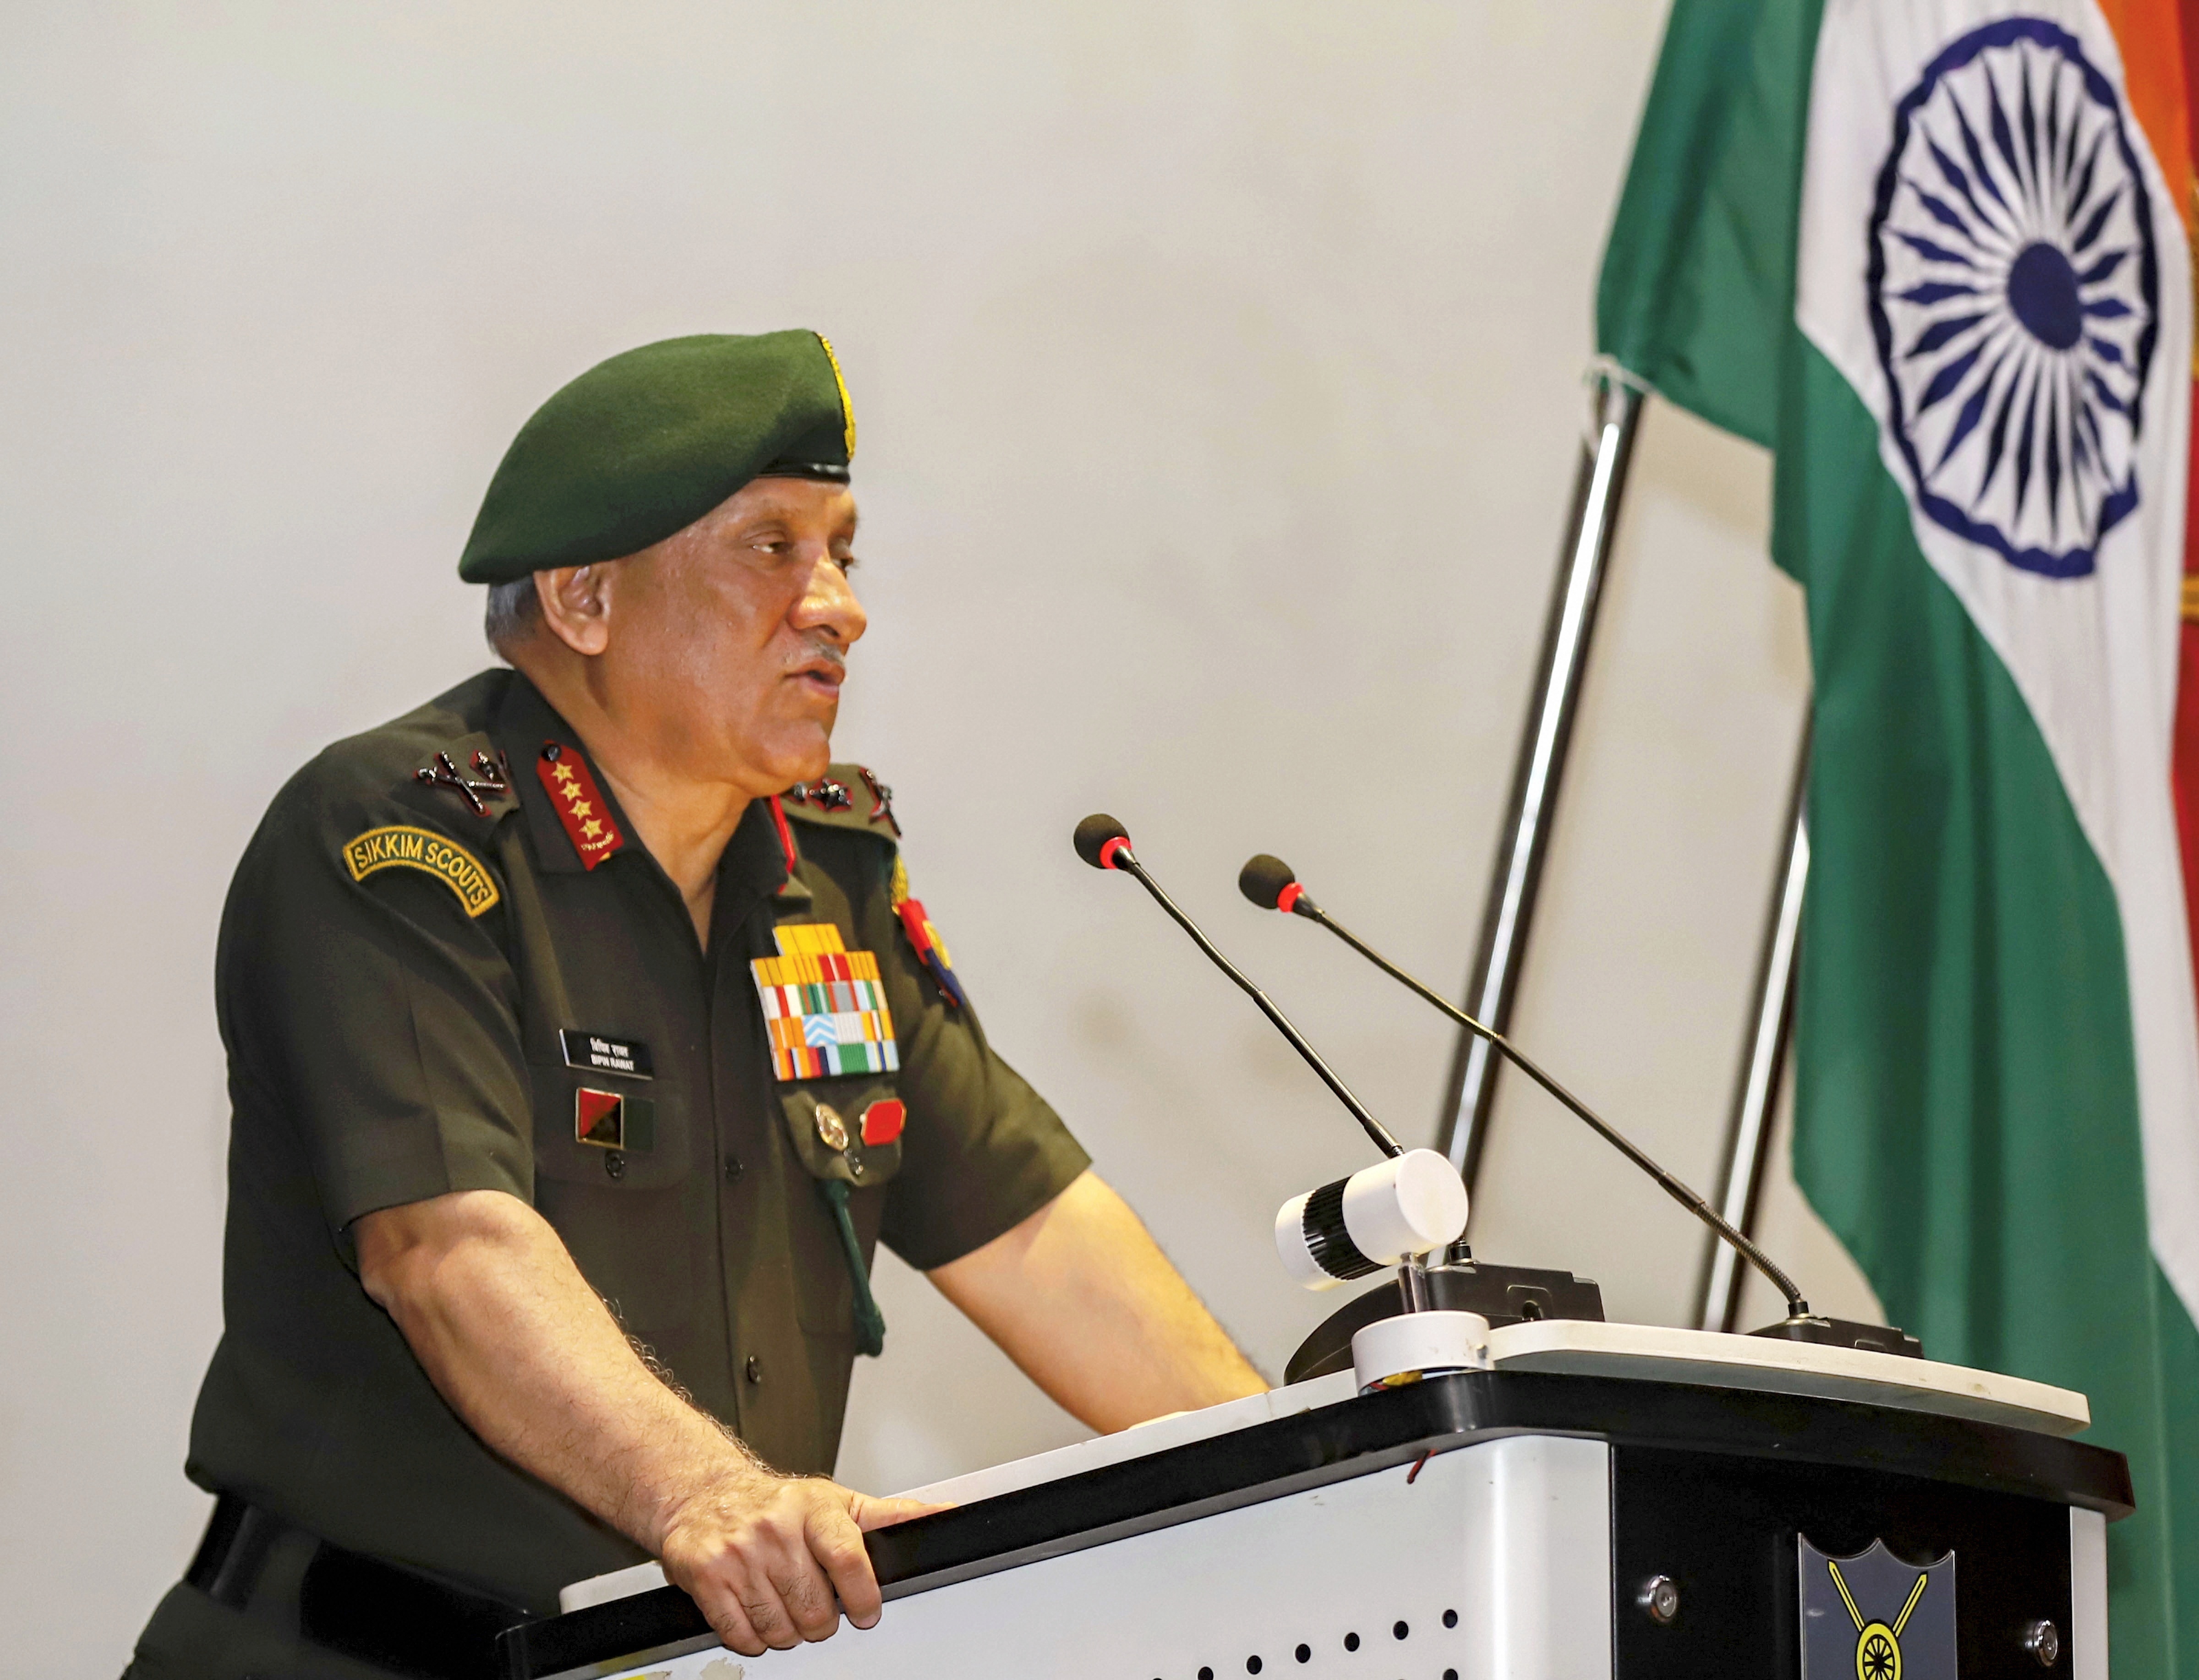 Army chief General Bipin Rawat during the inauguration of Young Leaders Training Wing at Officers Training Academy, in Chennai, Monday, September 23, 2019